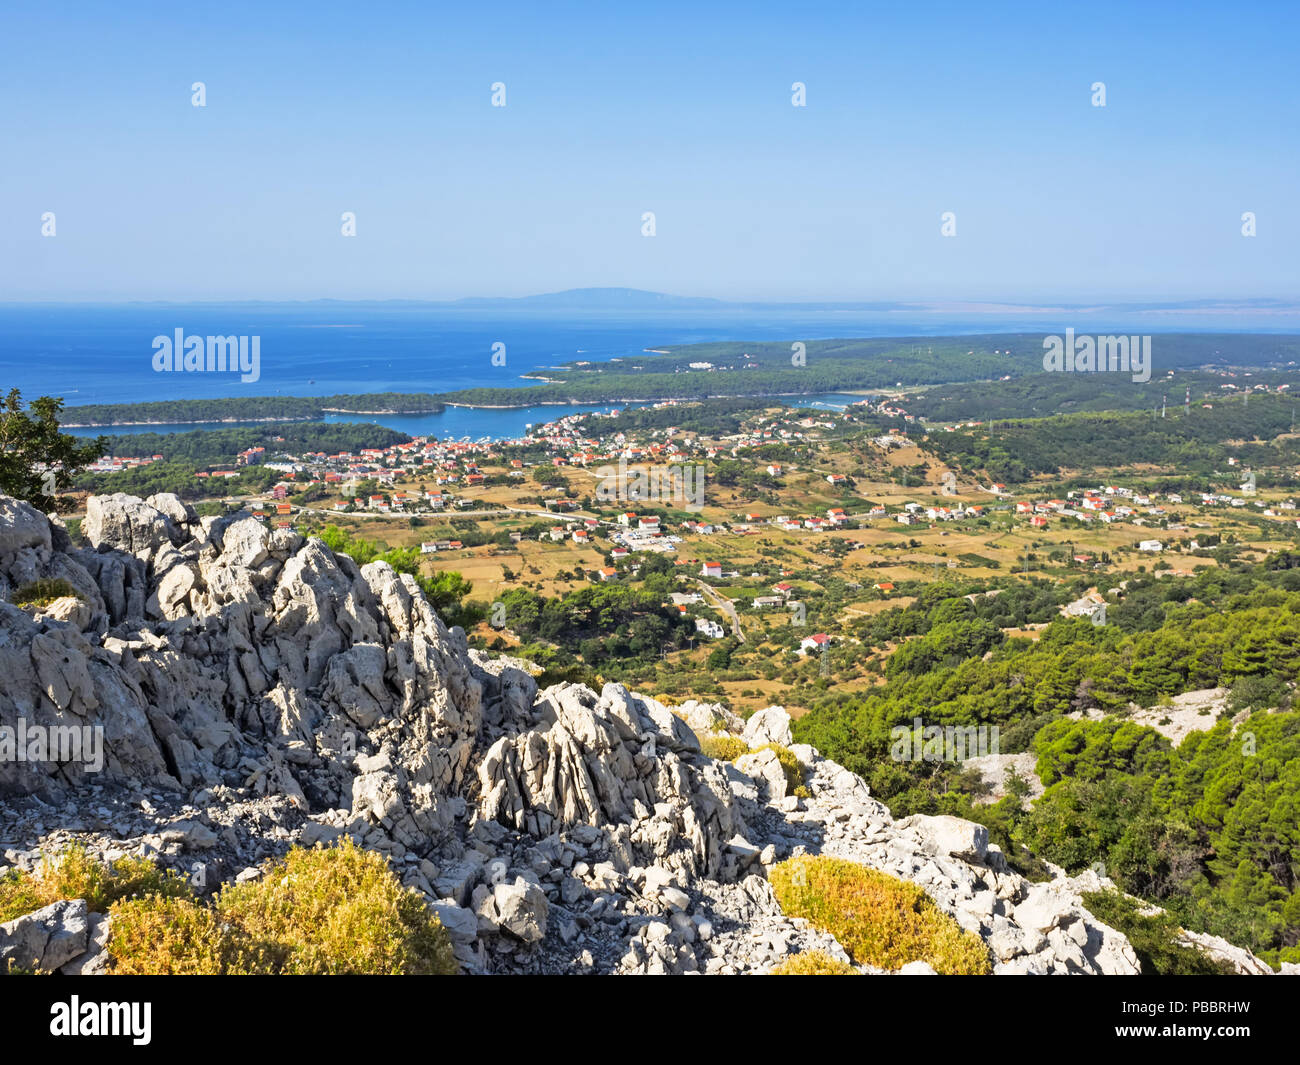 Aerial view of the island Rab with it's city Rab, Croatia Stock Photo